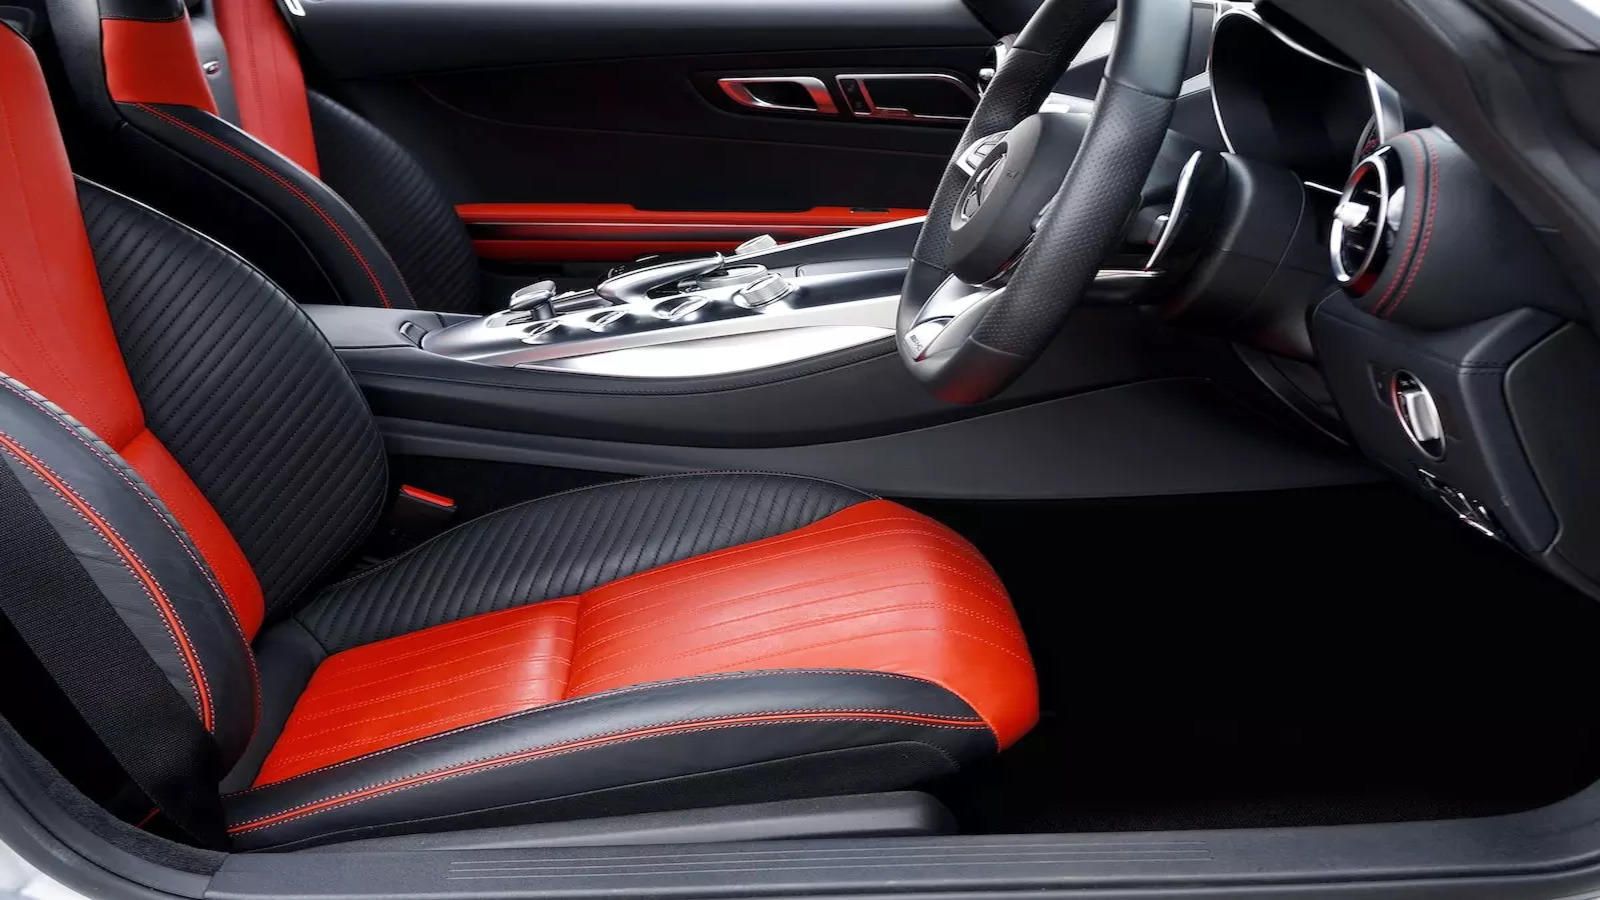 Protect And Style: How Premium Seat Covers Offer The Best Of Both Worlds
